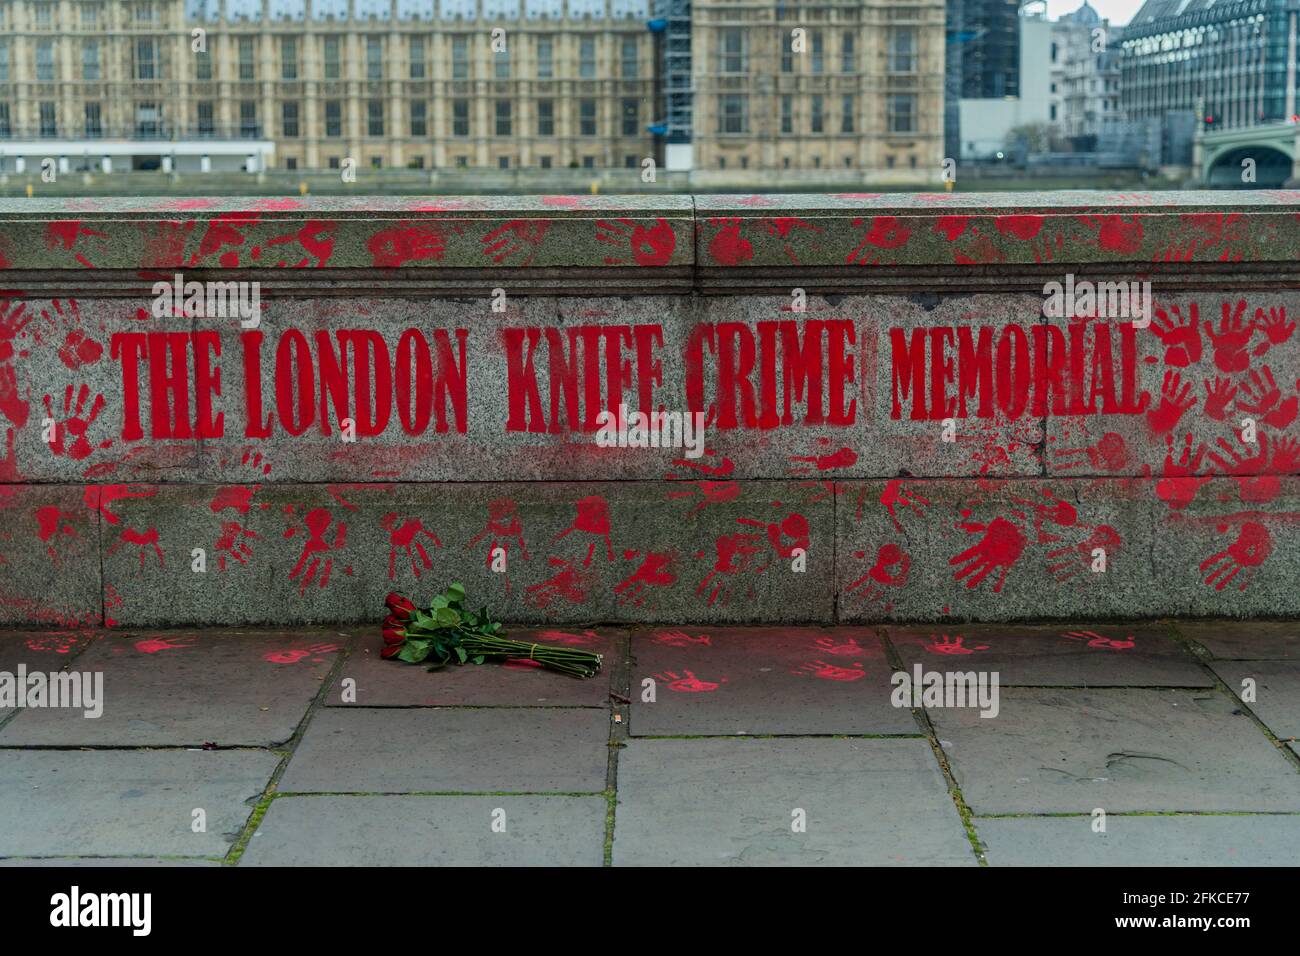 London, UK. 30th Apr, 2021. People have added a Knife Crime Memorial wall, opposite, with red hand prints instead of hearts - The national Covid Memorial Wall outside St Thomas' Hospital on the southbank is now largely completed. Mourners have drawn hearts by hand on a wall opposite Parliament in London. Credit: Guy Bell/Alamy Live News Stock Photo